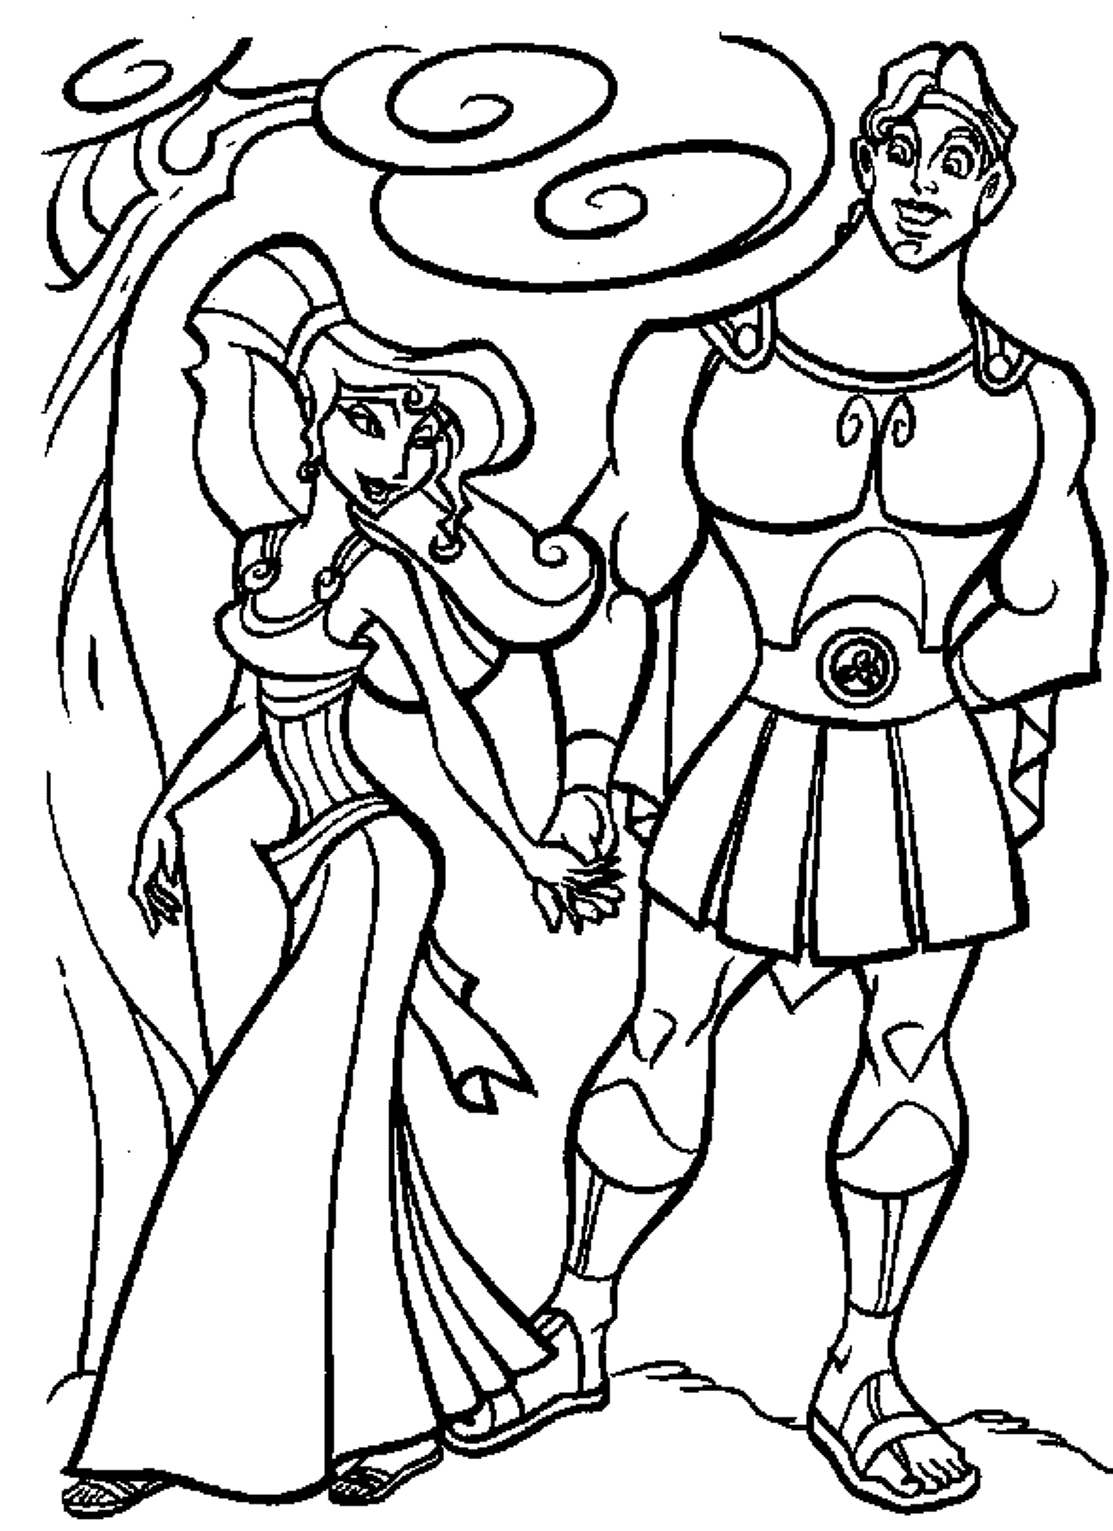 Hercules Coloring Pages Disney - Coloring Home